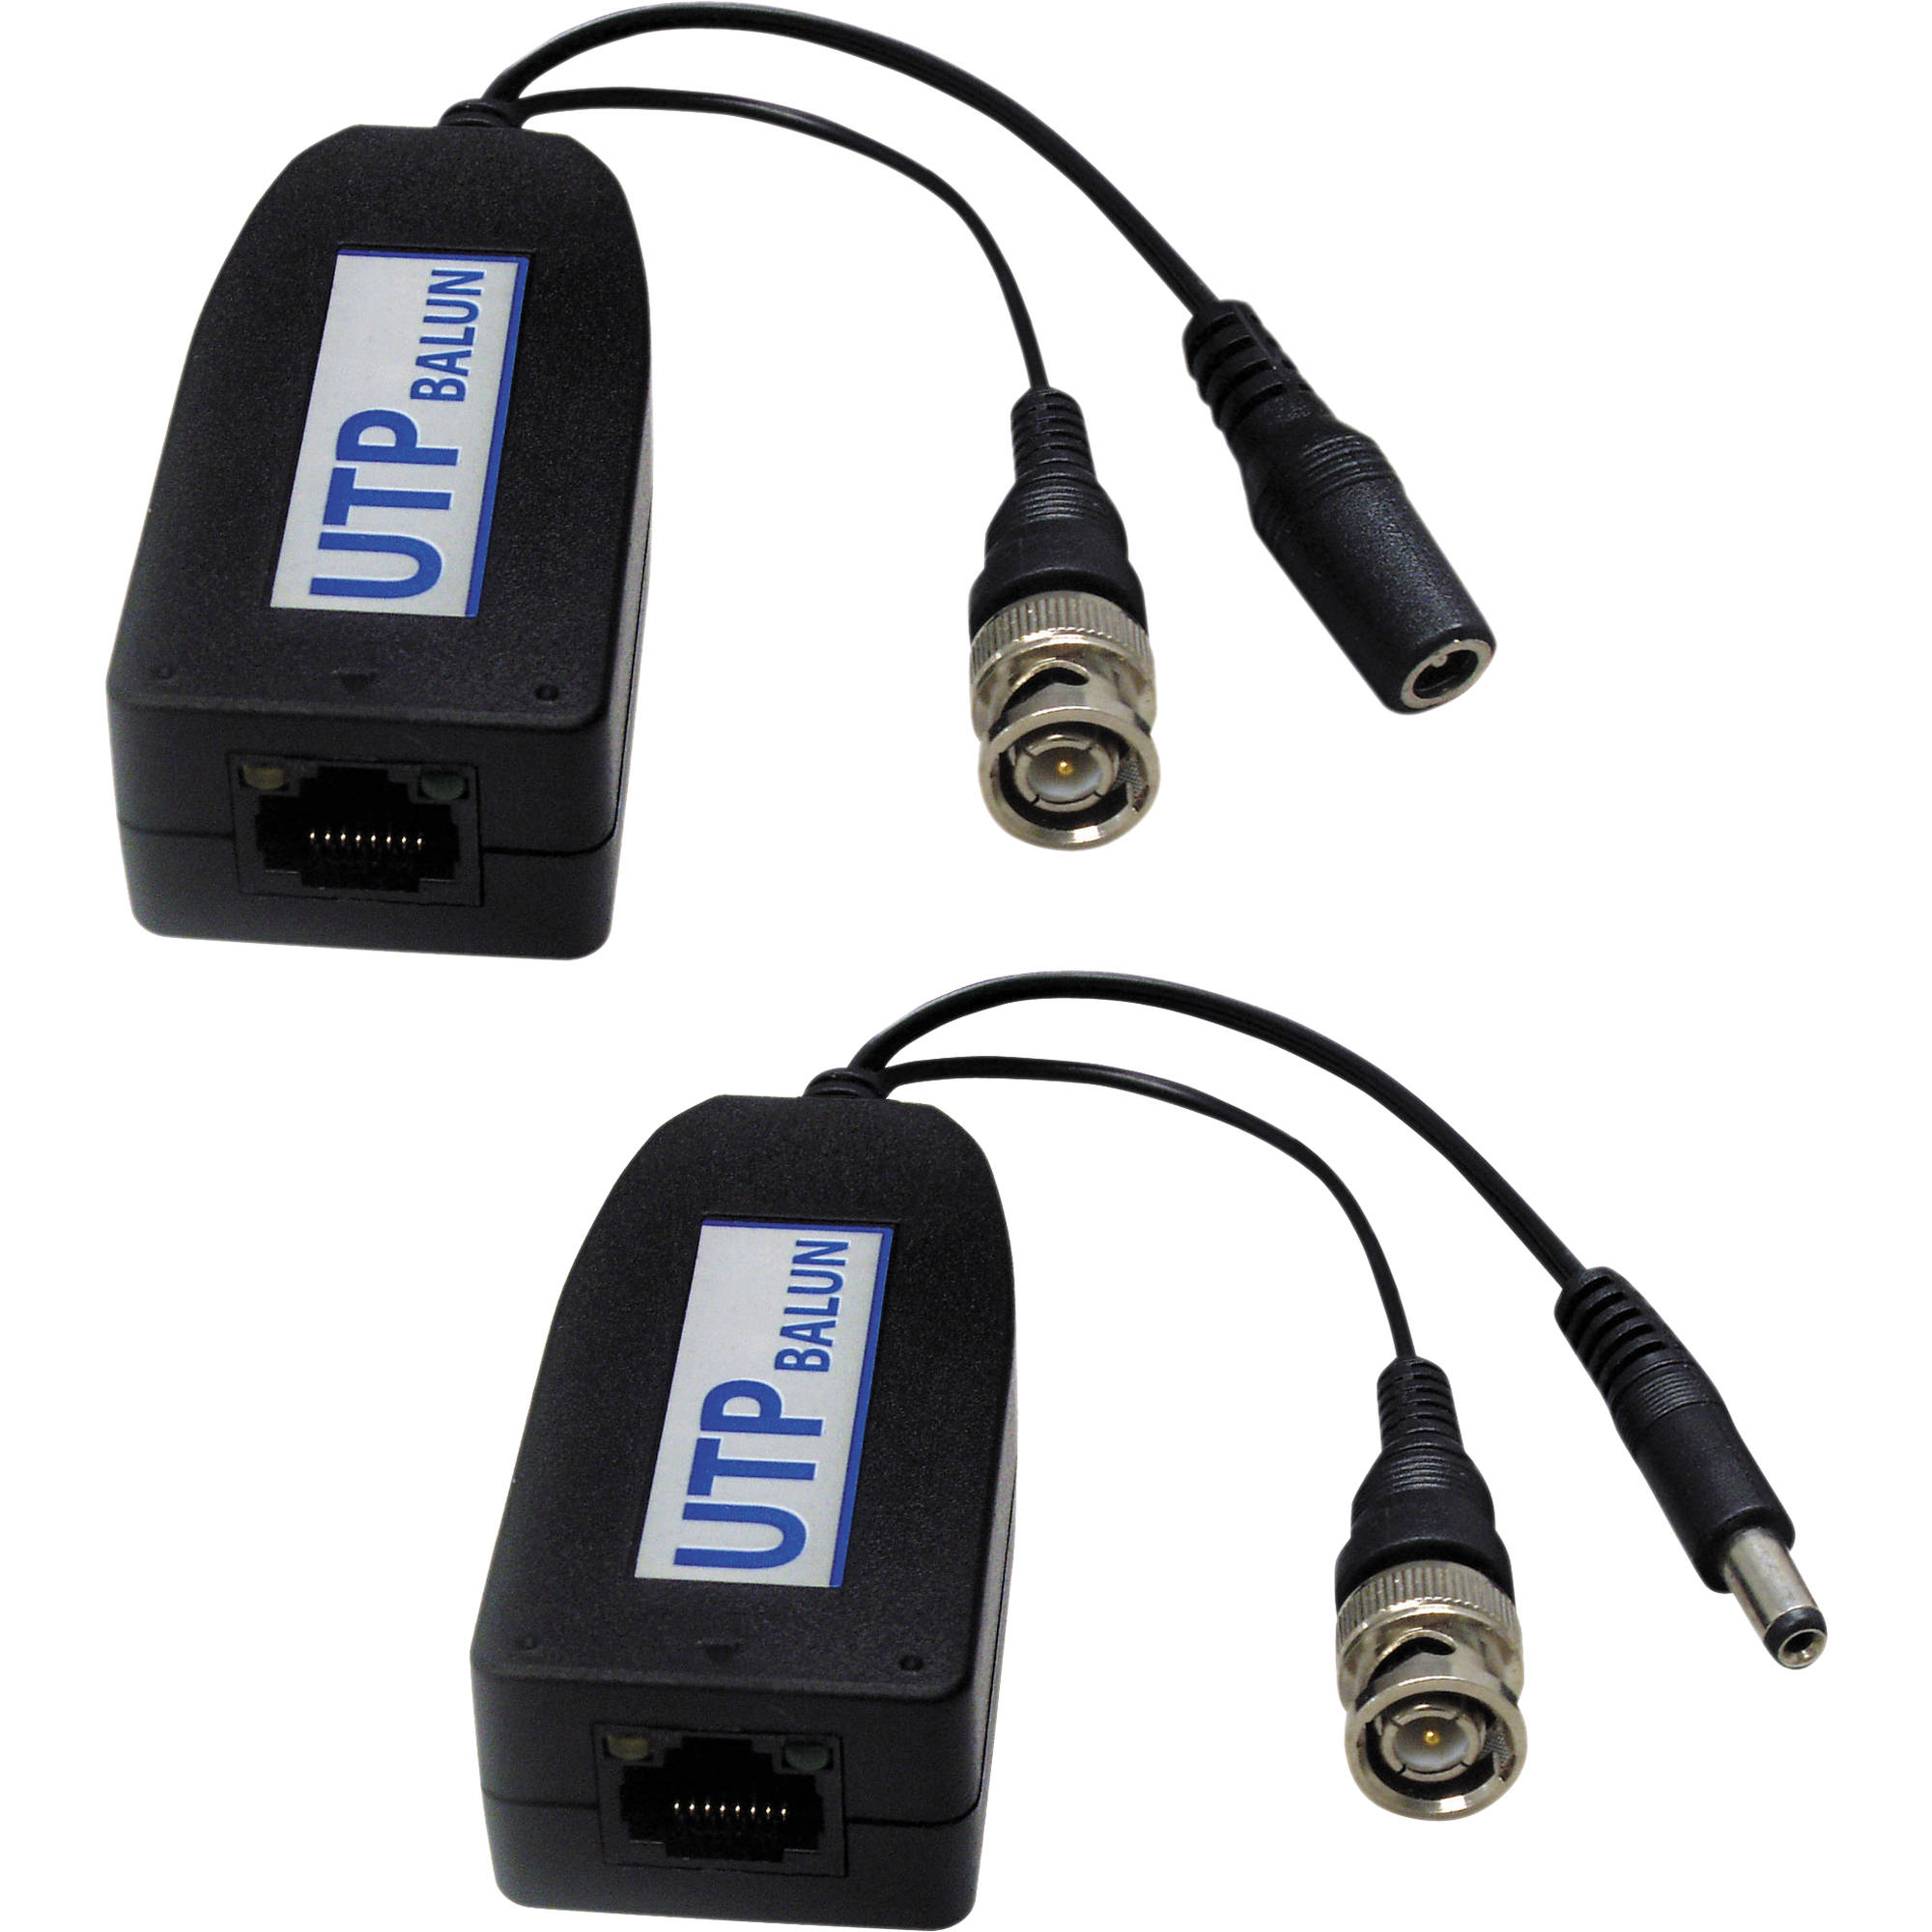 Power Balun Passive Connector Adaptor for CCTV Camera UHPPOTE 1 Pair Coax BNC Video 